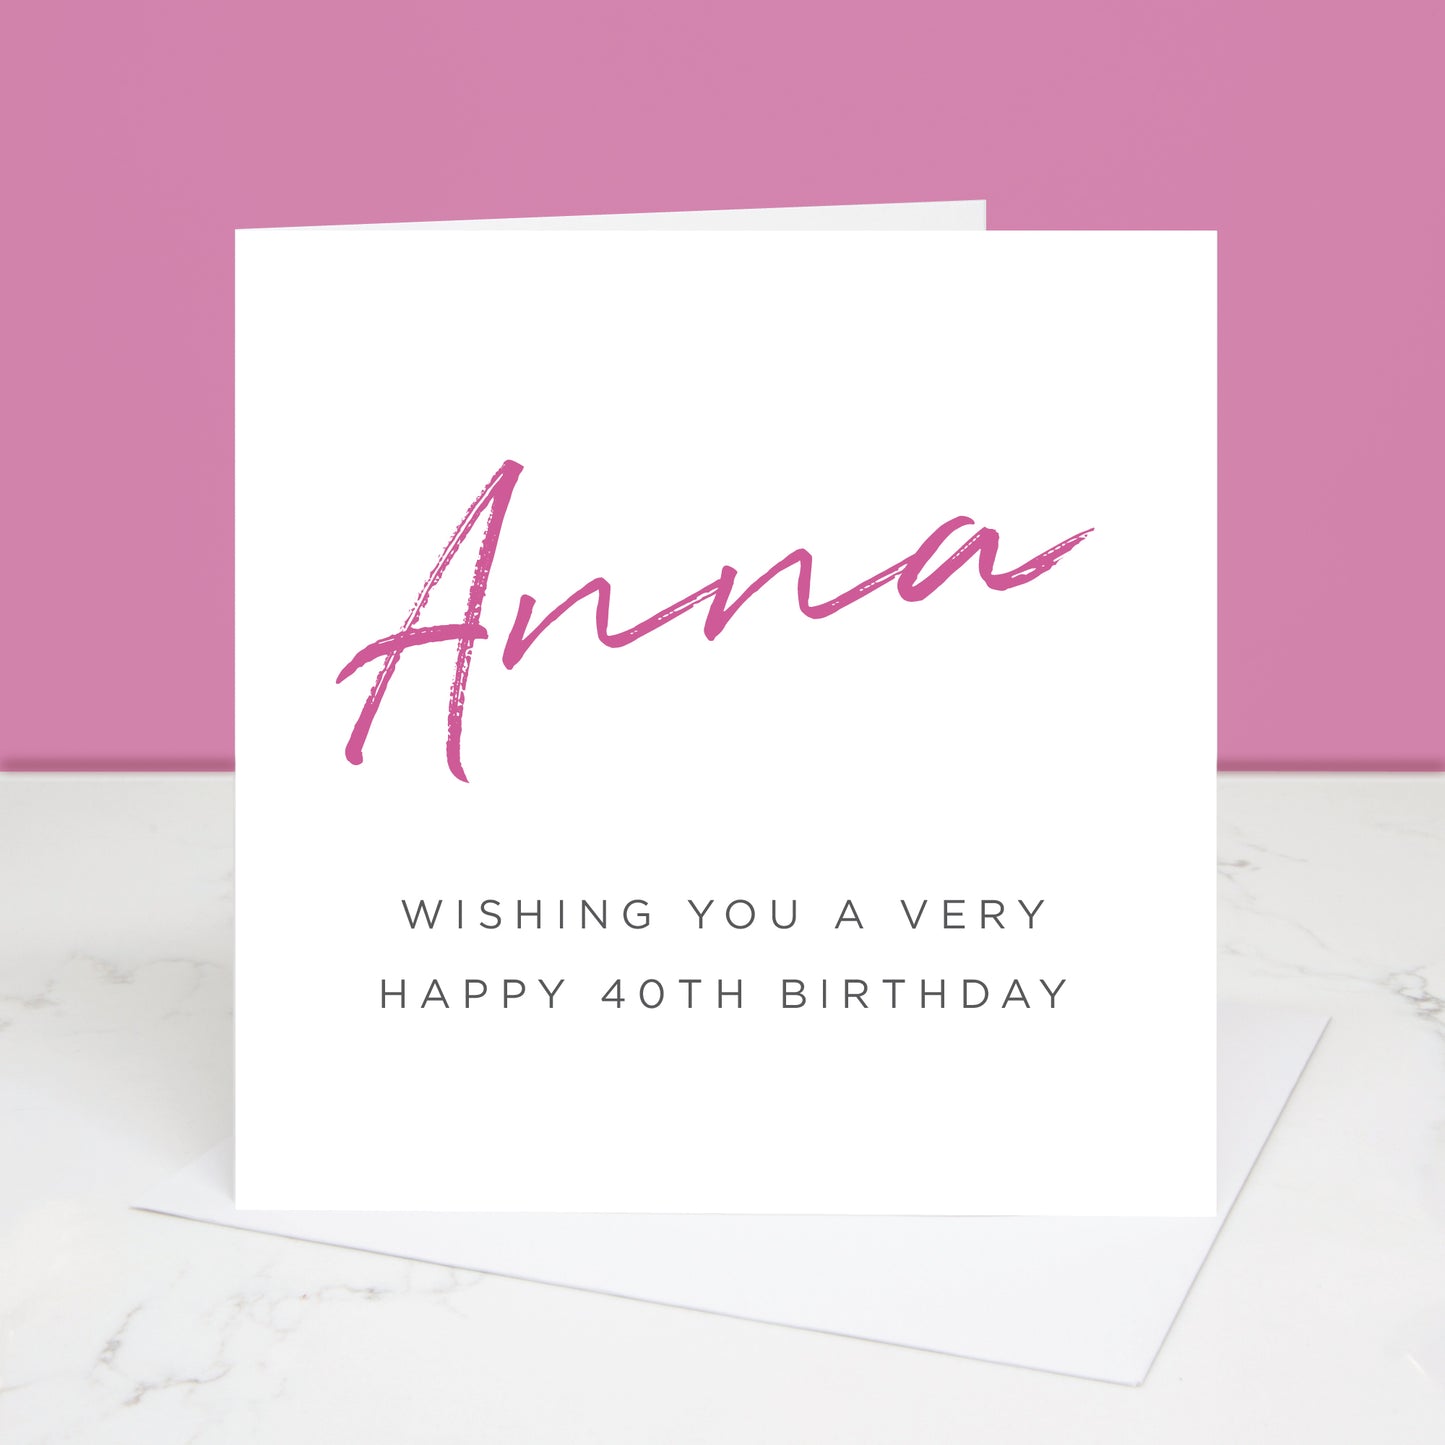 40th birthday card with their name in a choice of colours and the words wishing you a very happy 40th birthday underneath. All images & designs © Slice of Pie Designs